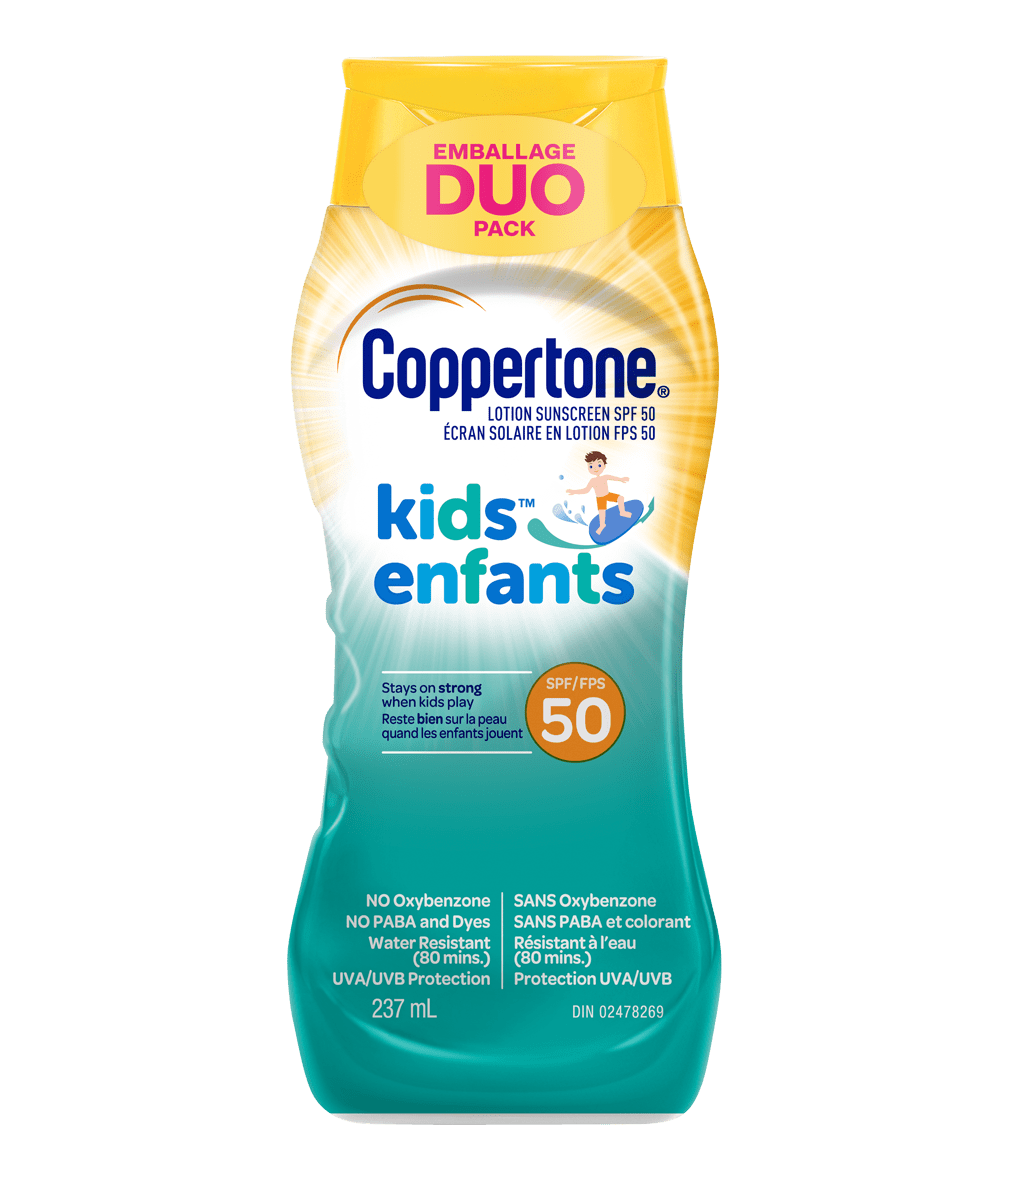 Coppertone® KIDS Sunscreen Lotion SPF50 Duo Pack